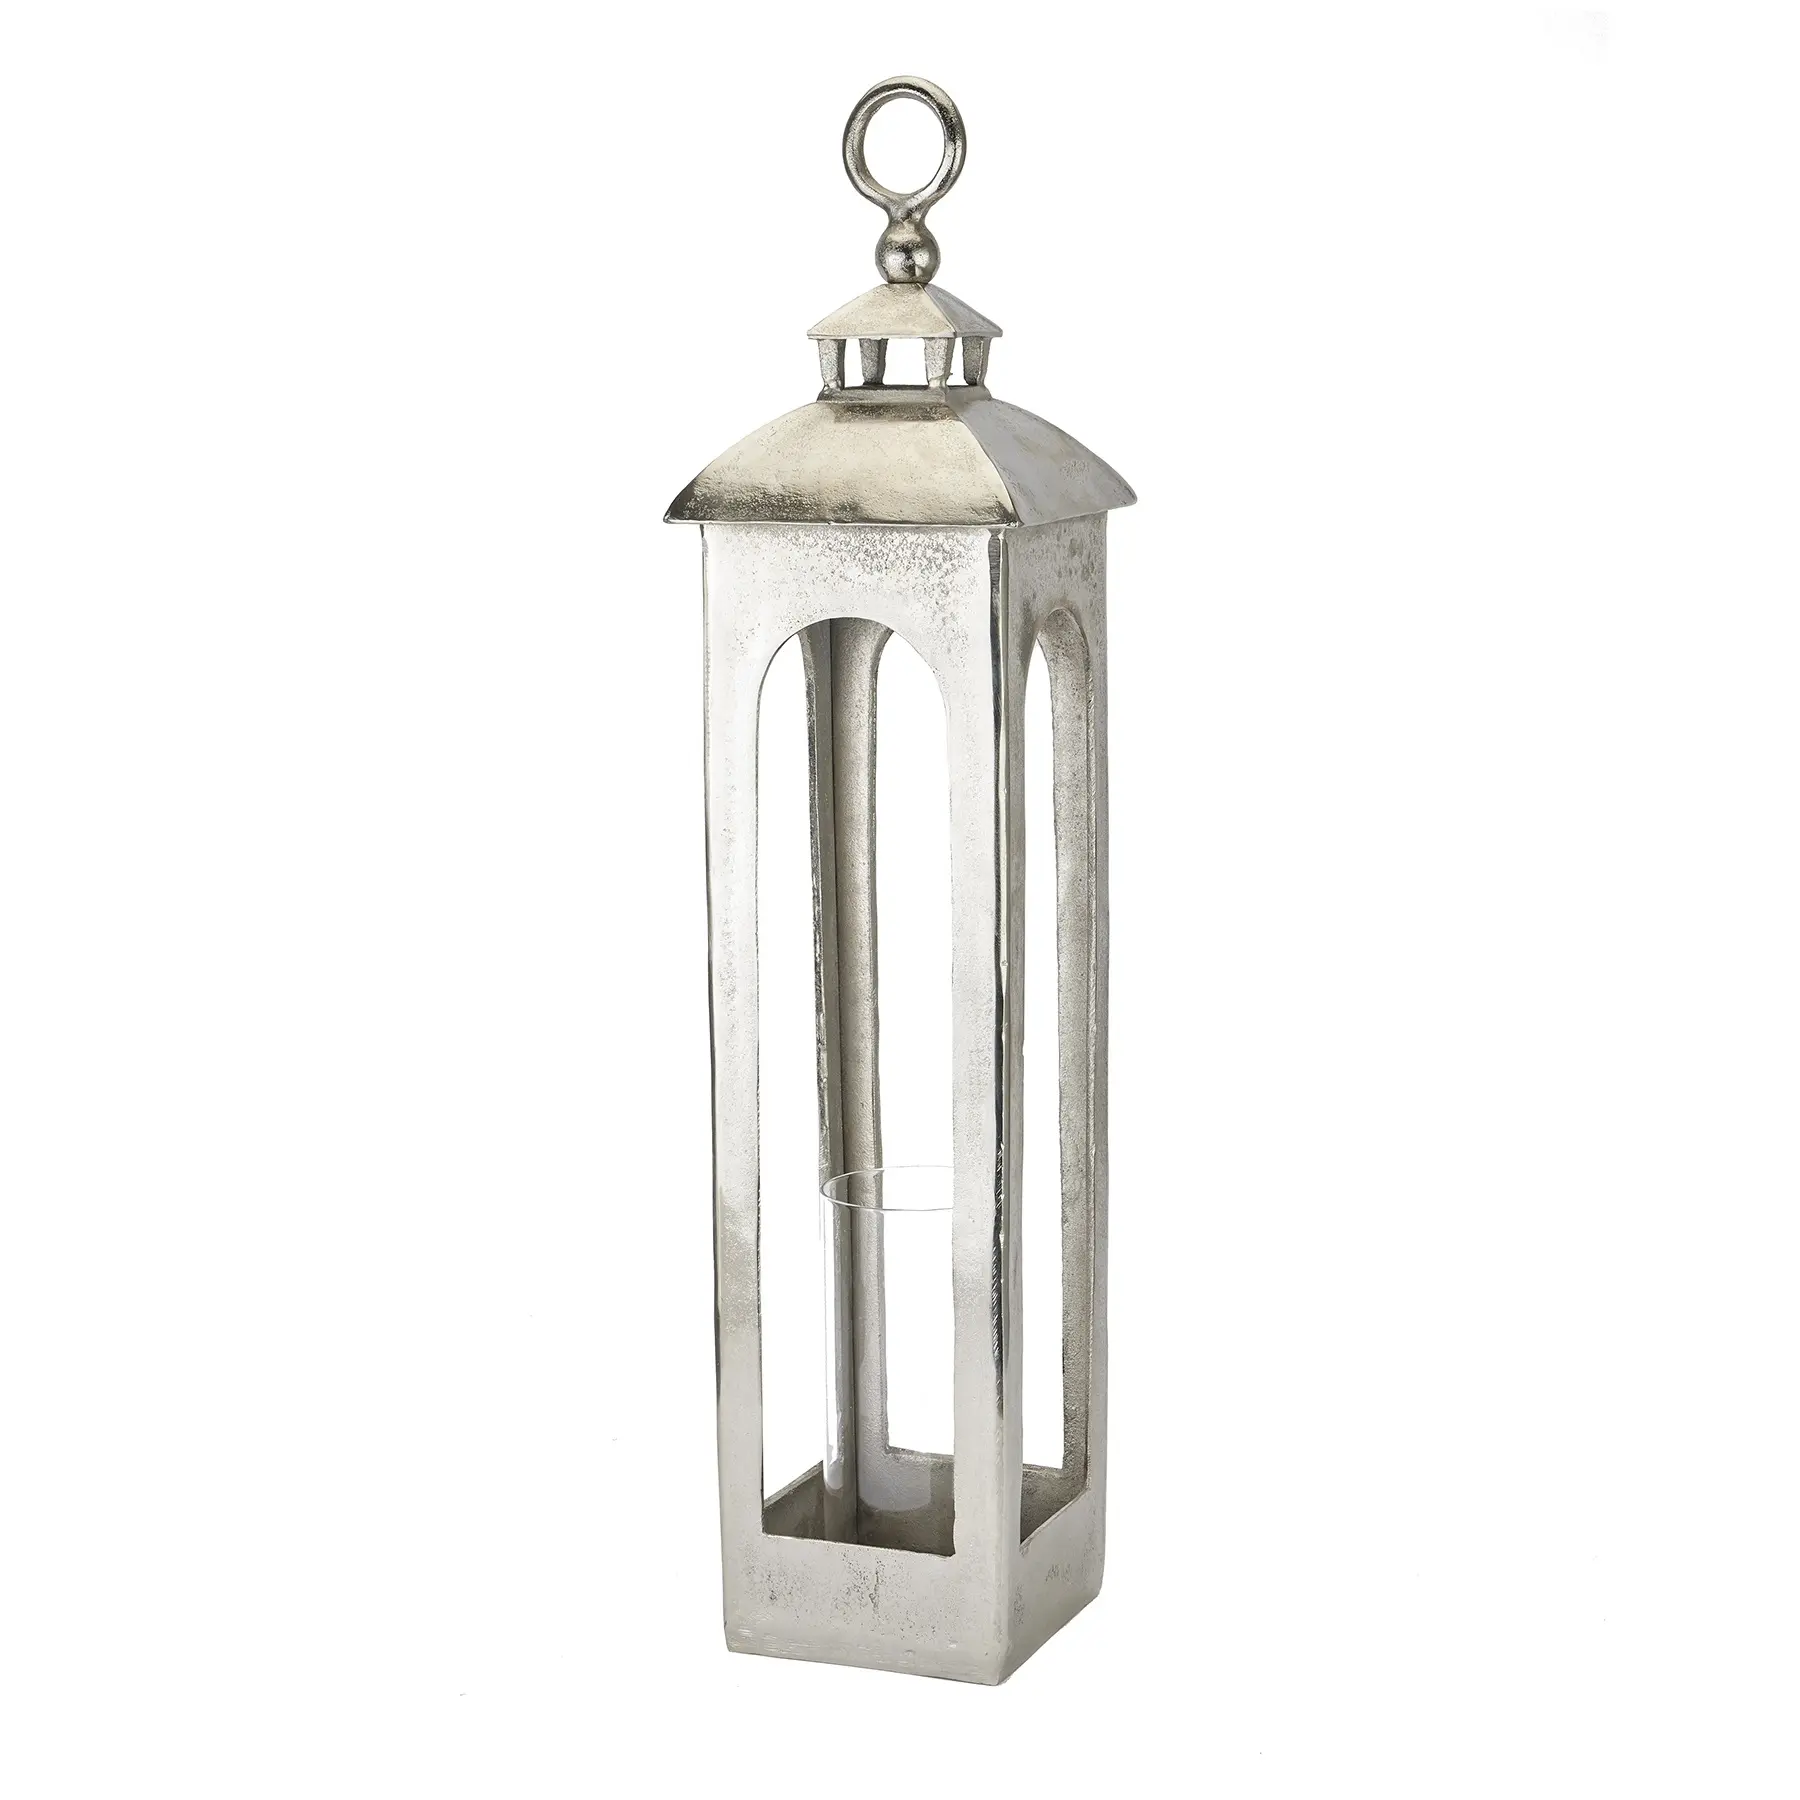 Casted Aluminium Glass Candle Lantern for Home Decor Wedding Centerpiece Garden Lantern With Handle Metal Lantern for candle